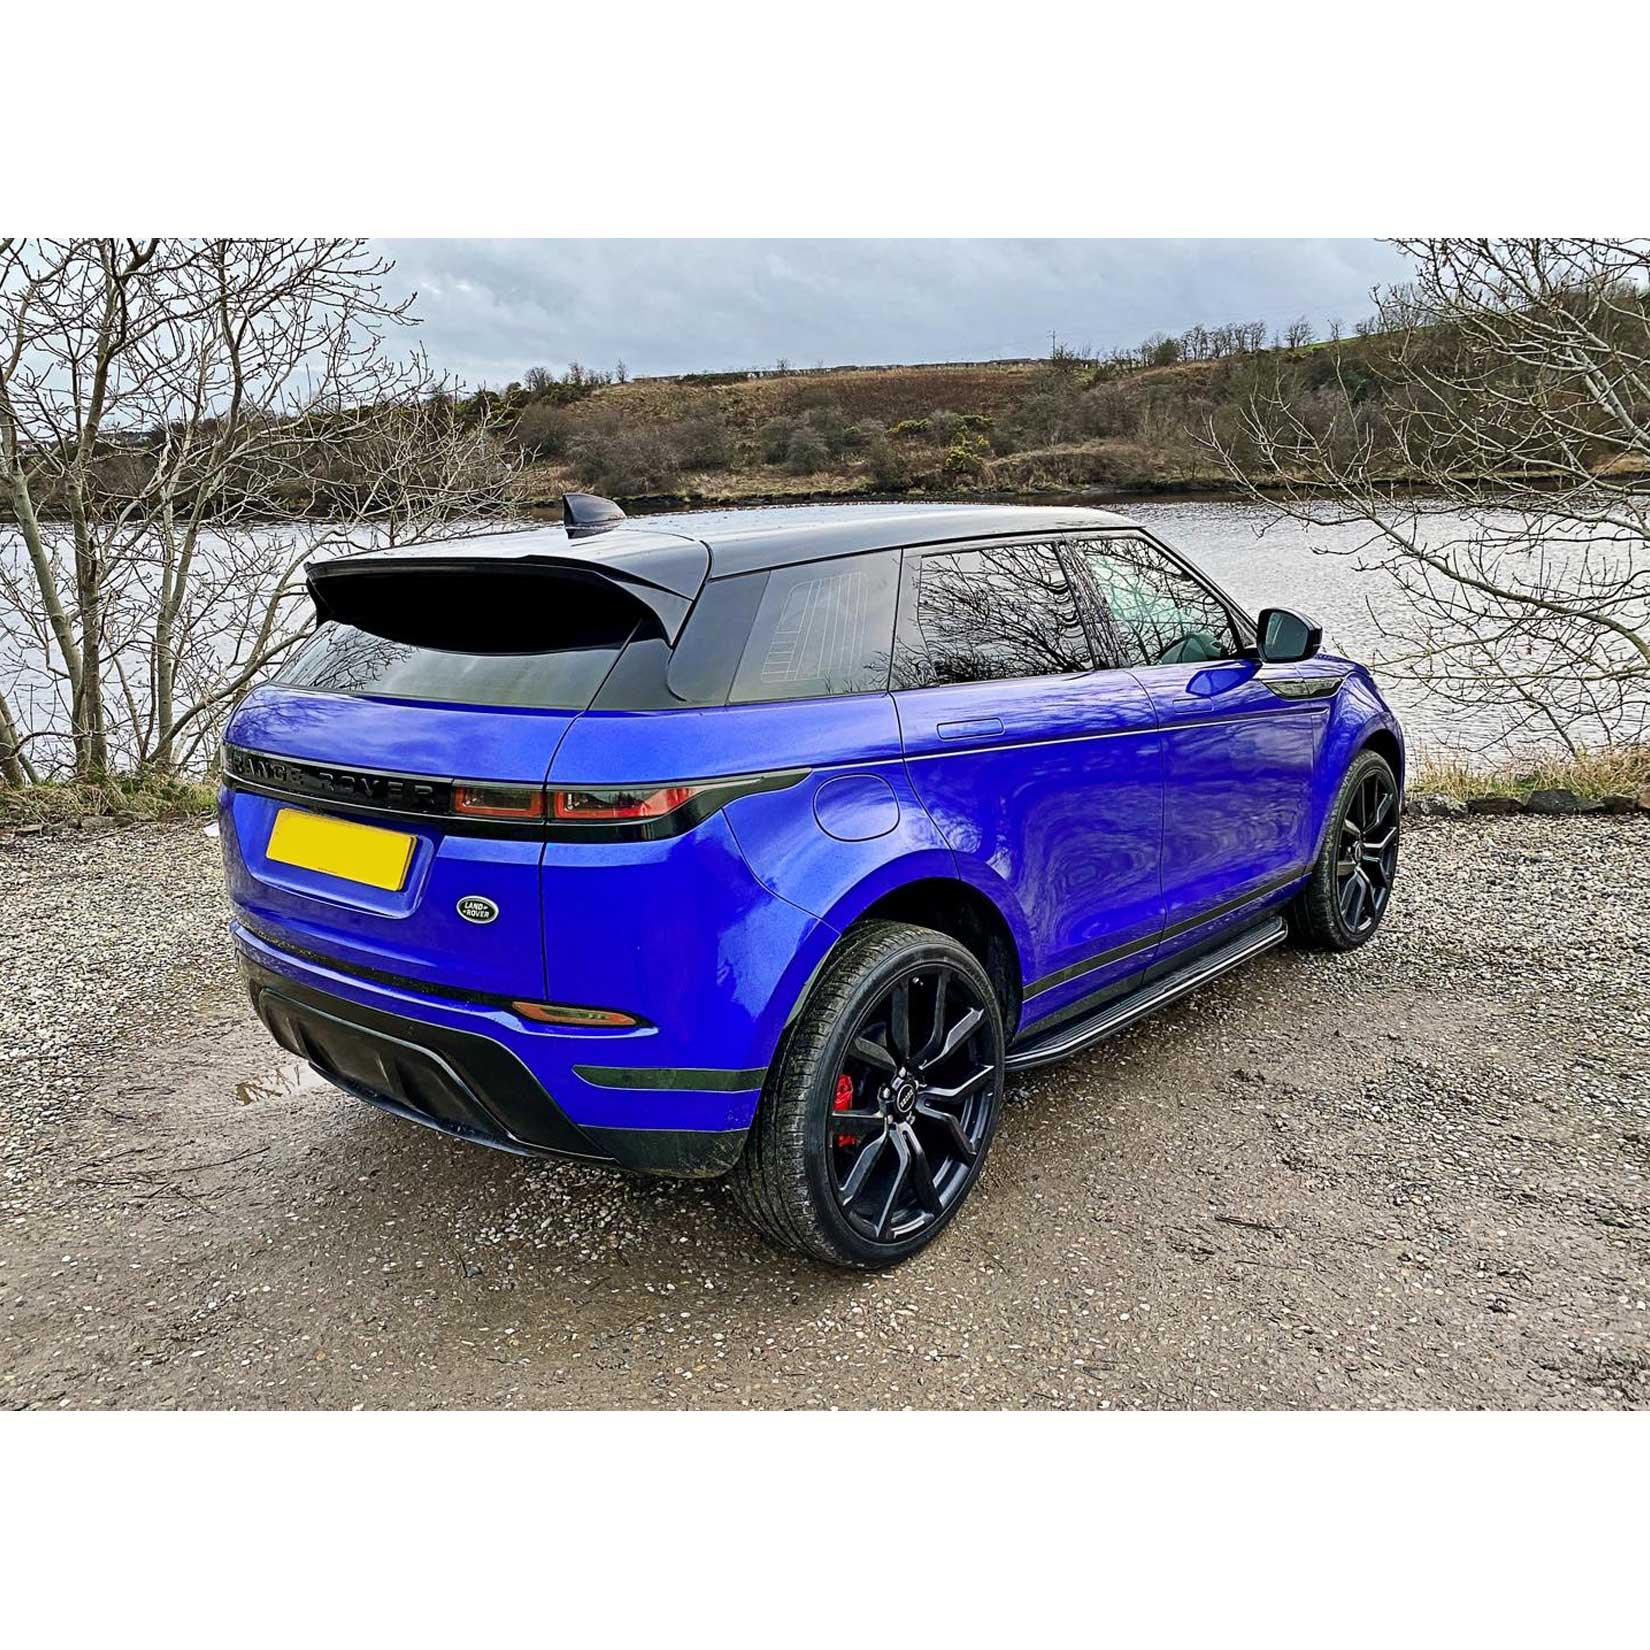 RANGE ROVER EVOQUE 2018 ON OE STYLE RUNNING BOARDS – SIDE STEPS – IN BLACK – PAIR - RisperStyling